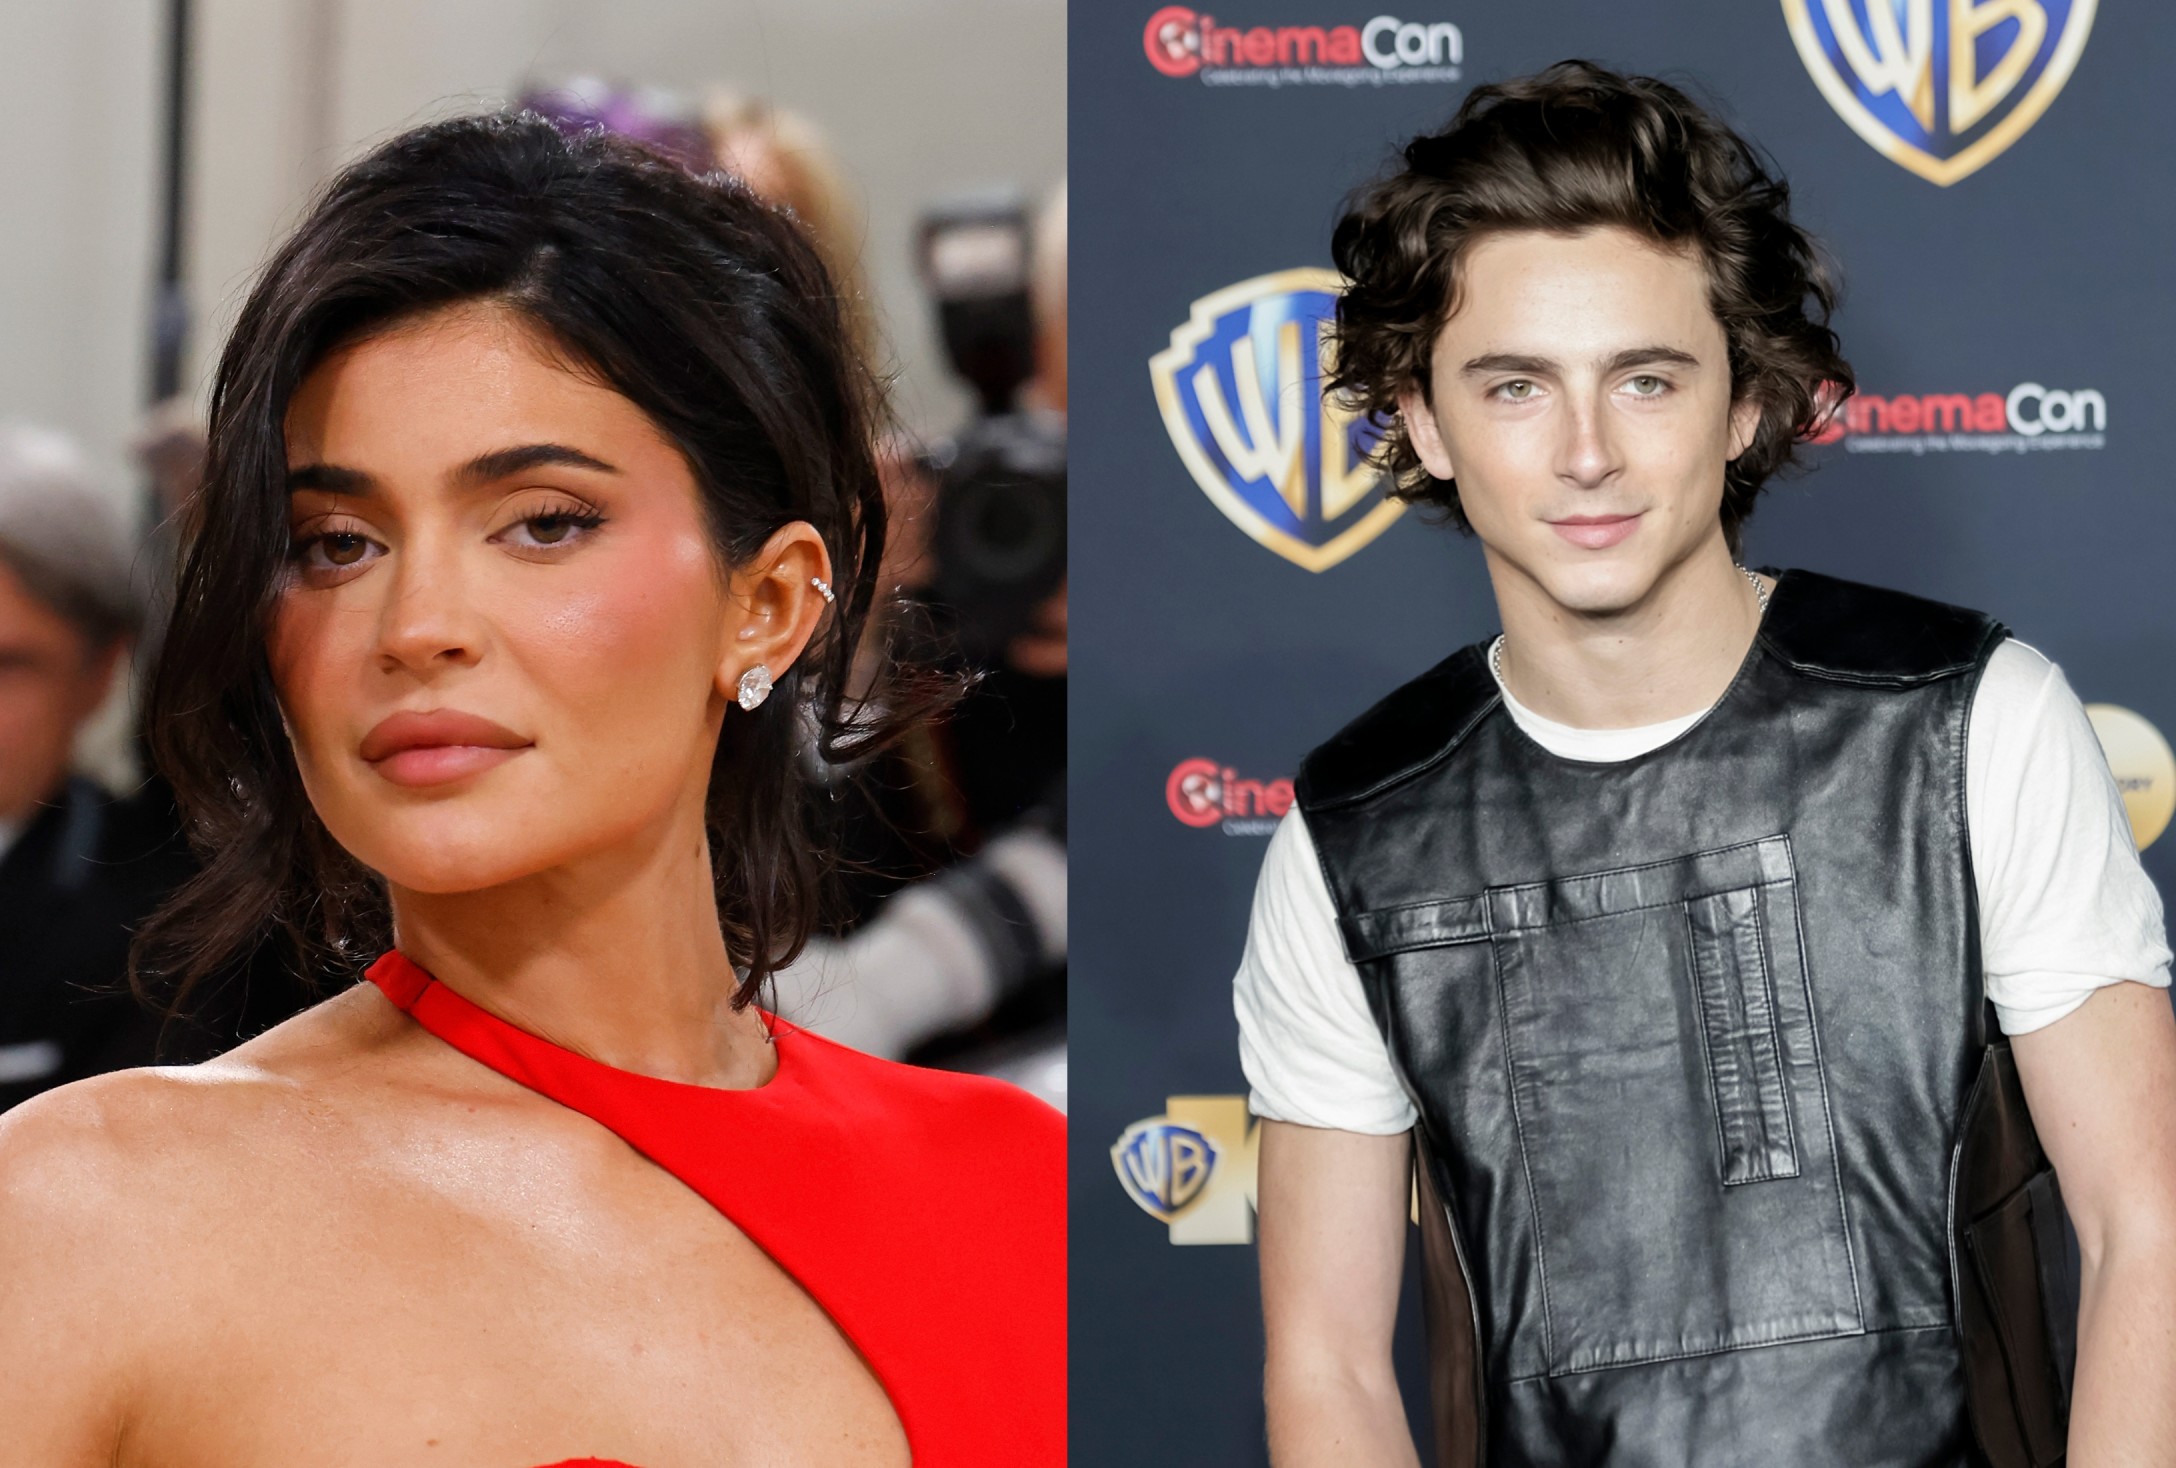 Kylie Jenner & Timothee Chalamet Are Cute, Actually